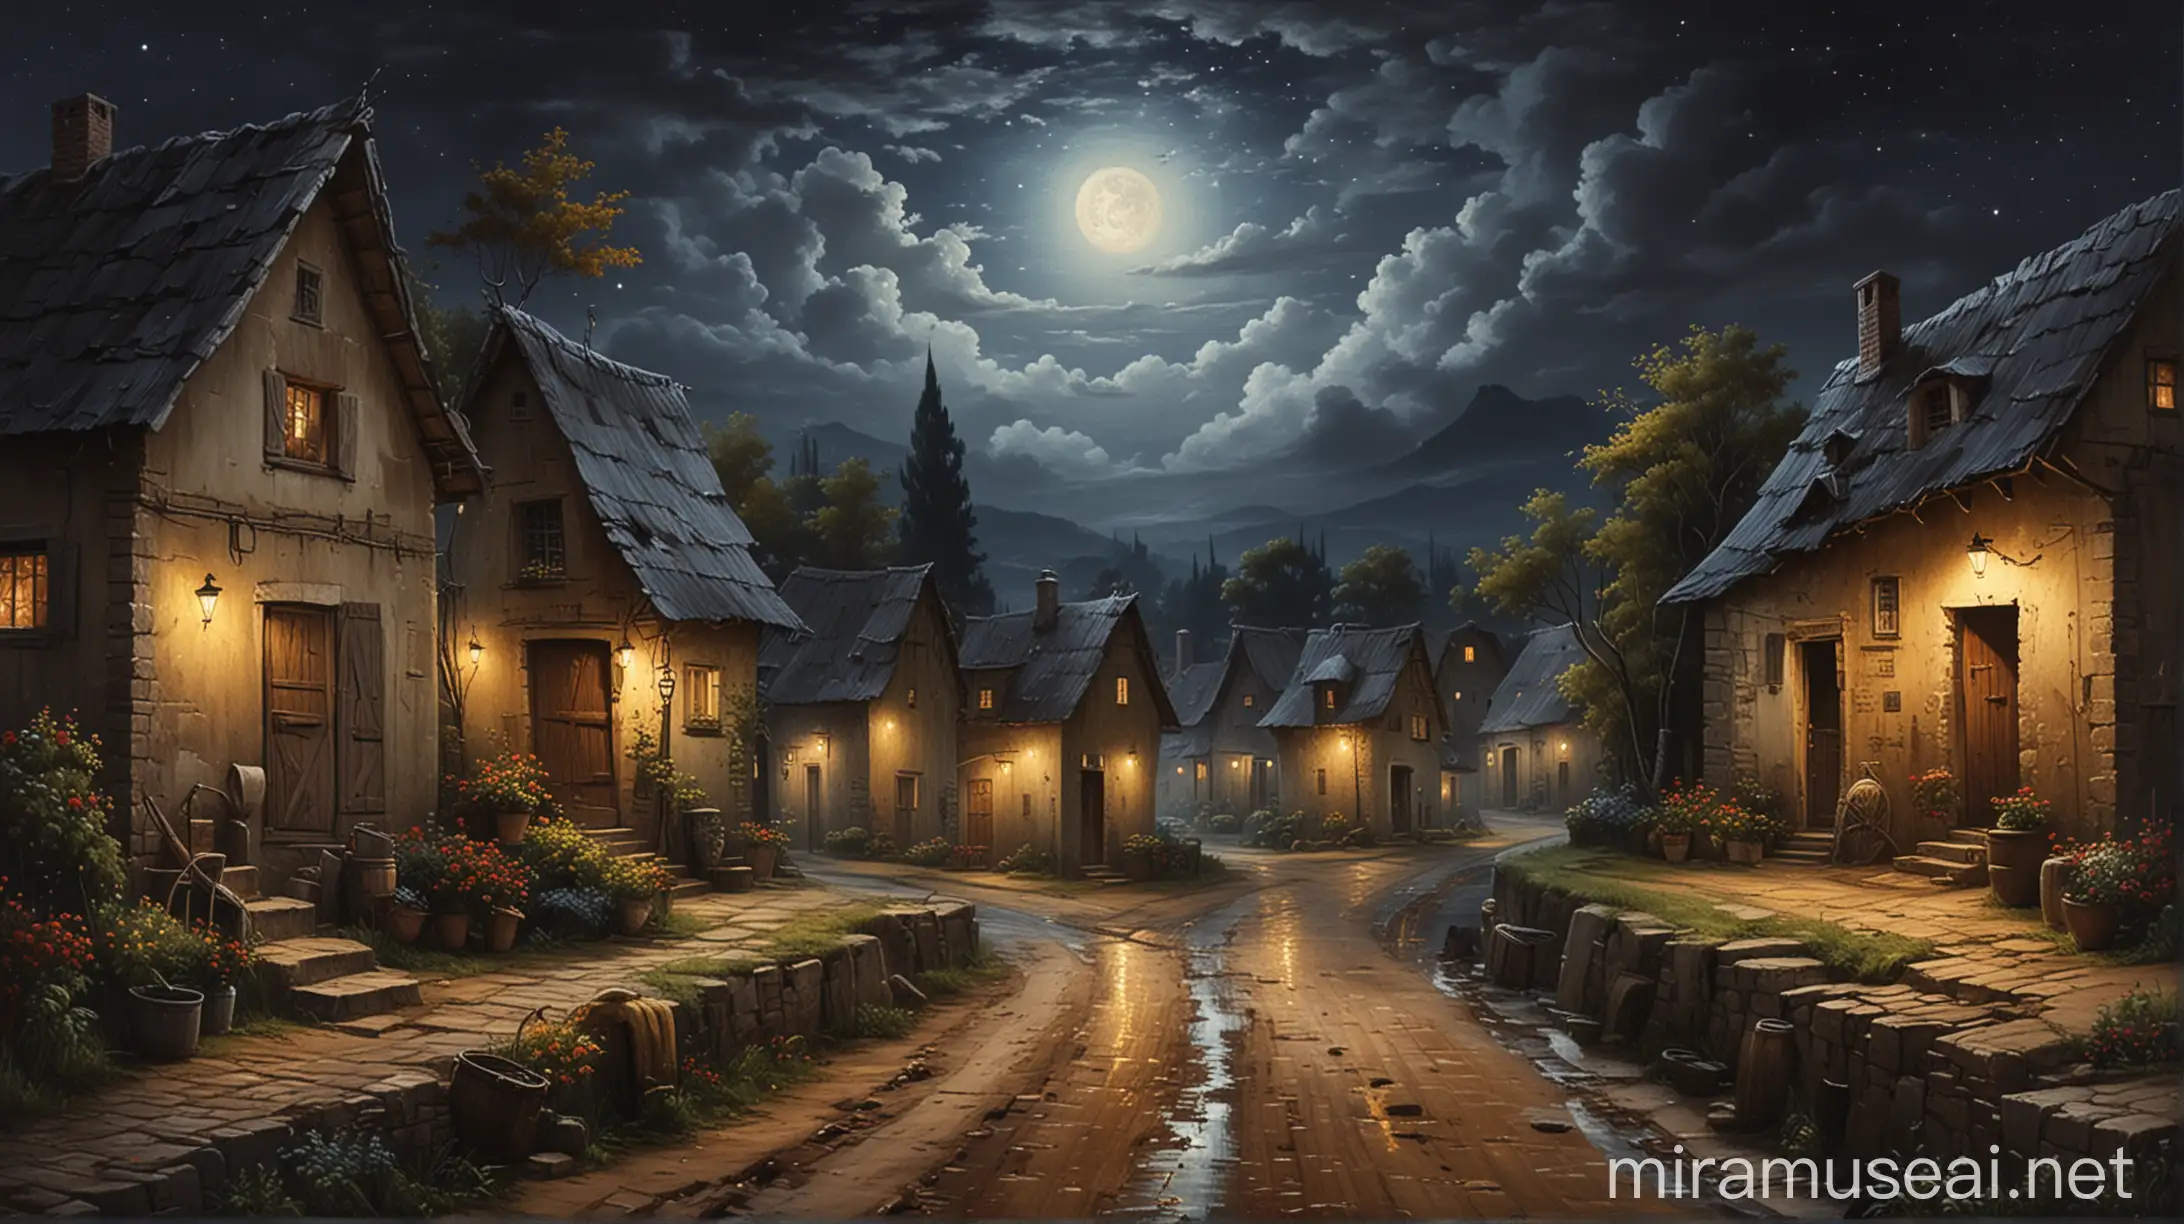 just village  in night  , by oil painting 